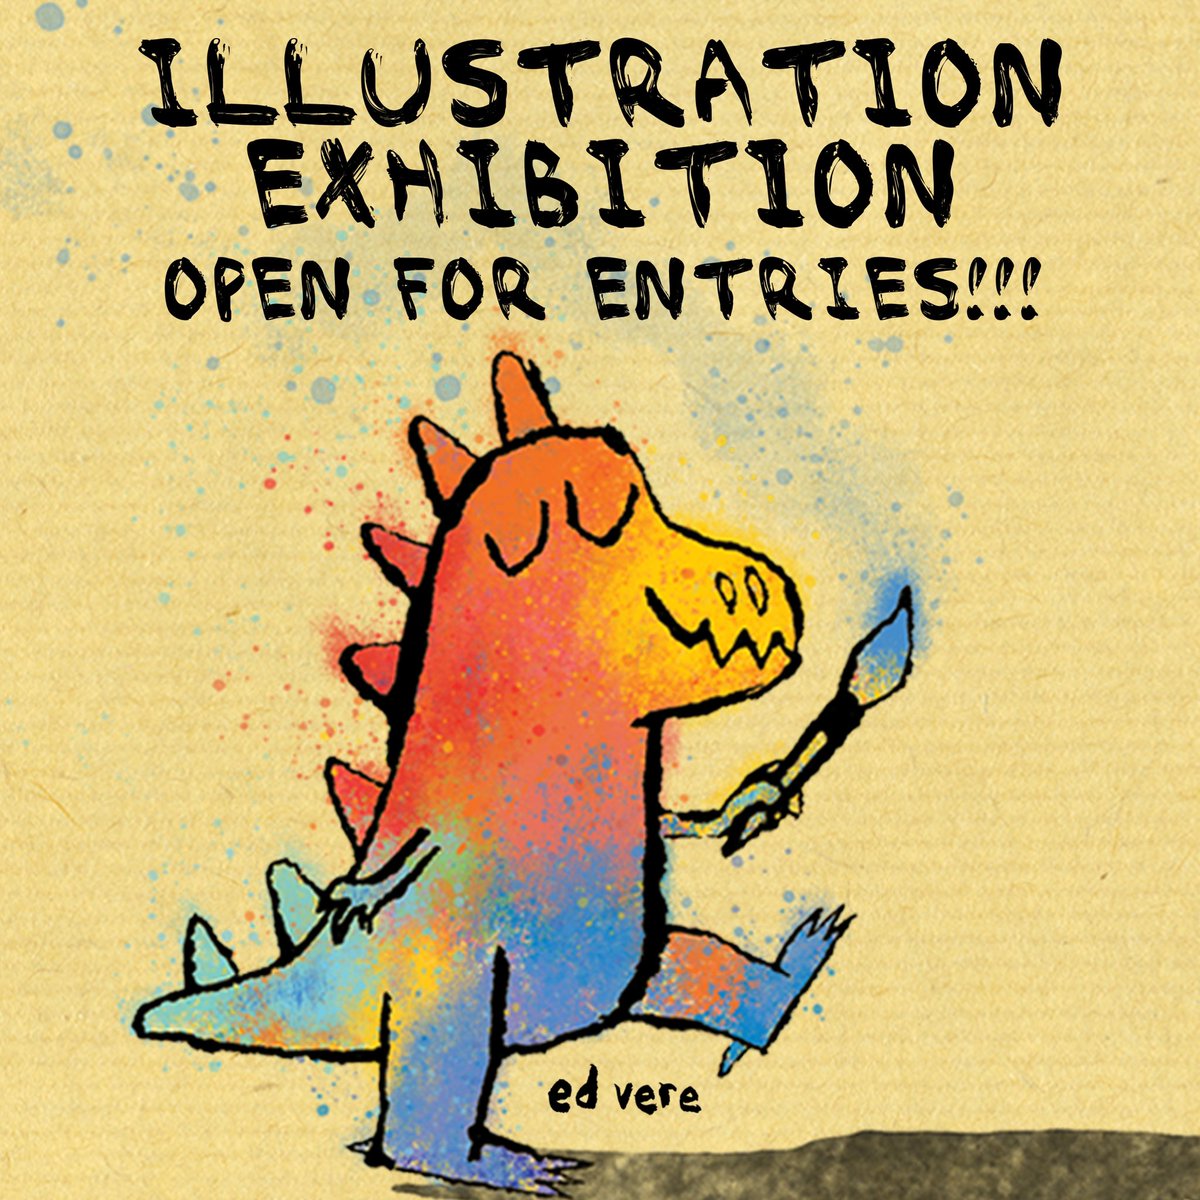 ILLUSTRATION EXHIBITION IS OPEN FOR ENTRIES!!!🖌️🎨 Don’t miss this amazing opportunity to showcase your talent at the @SCBWI_BI Confere! All @scbwi illustrators are invited to submit - no bookings or attendance needed.